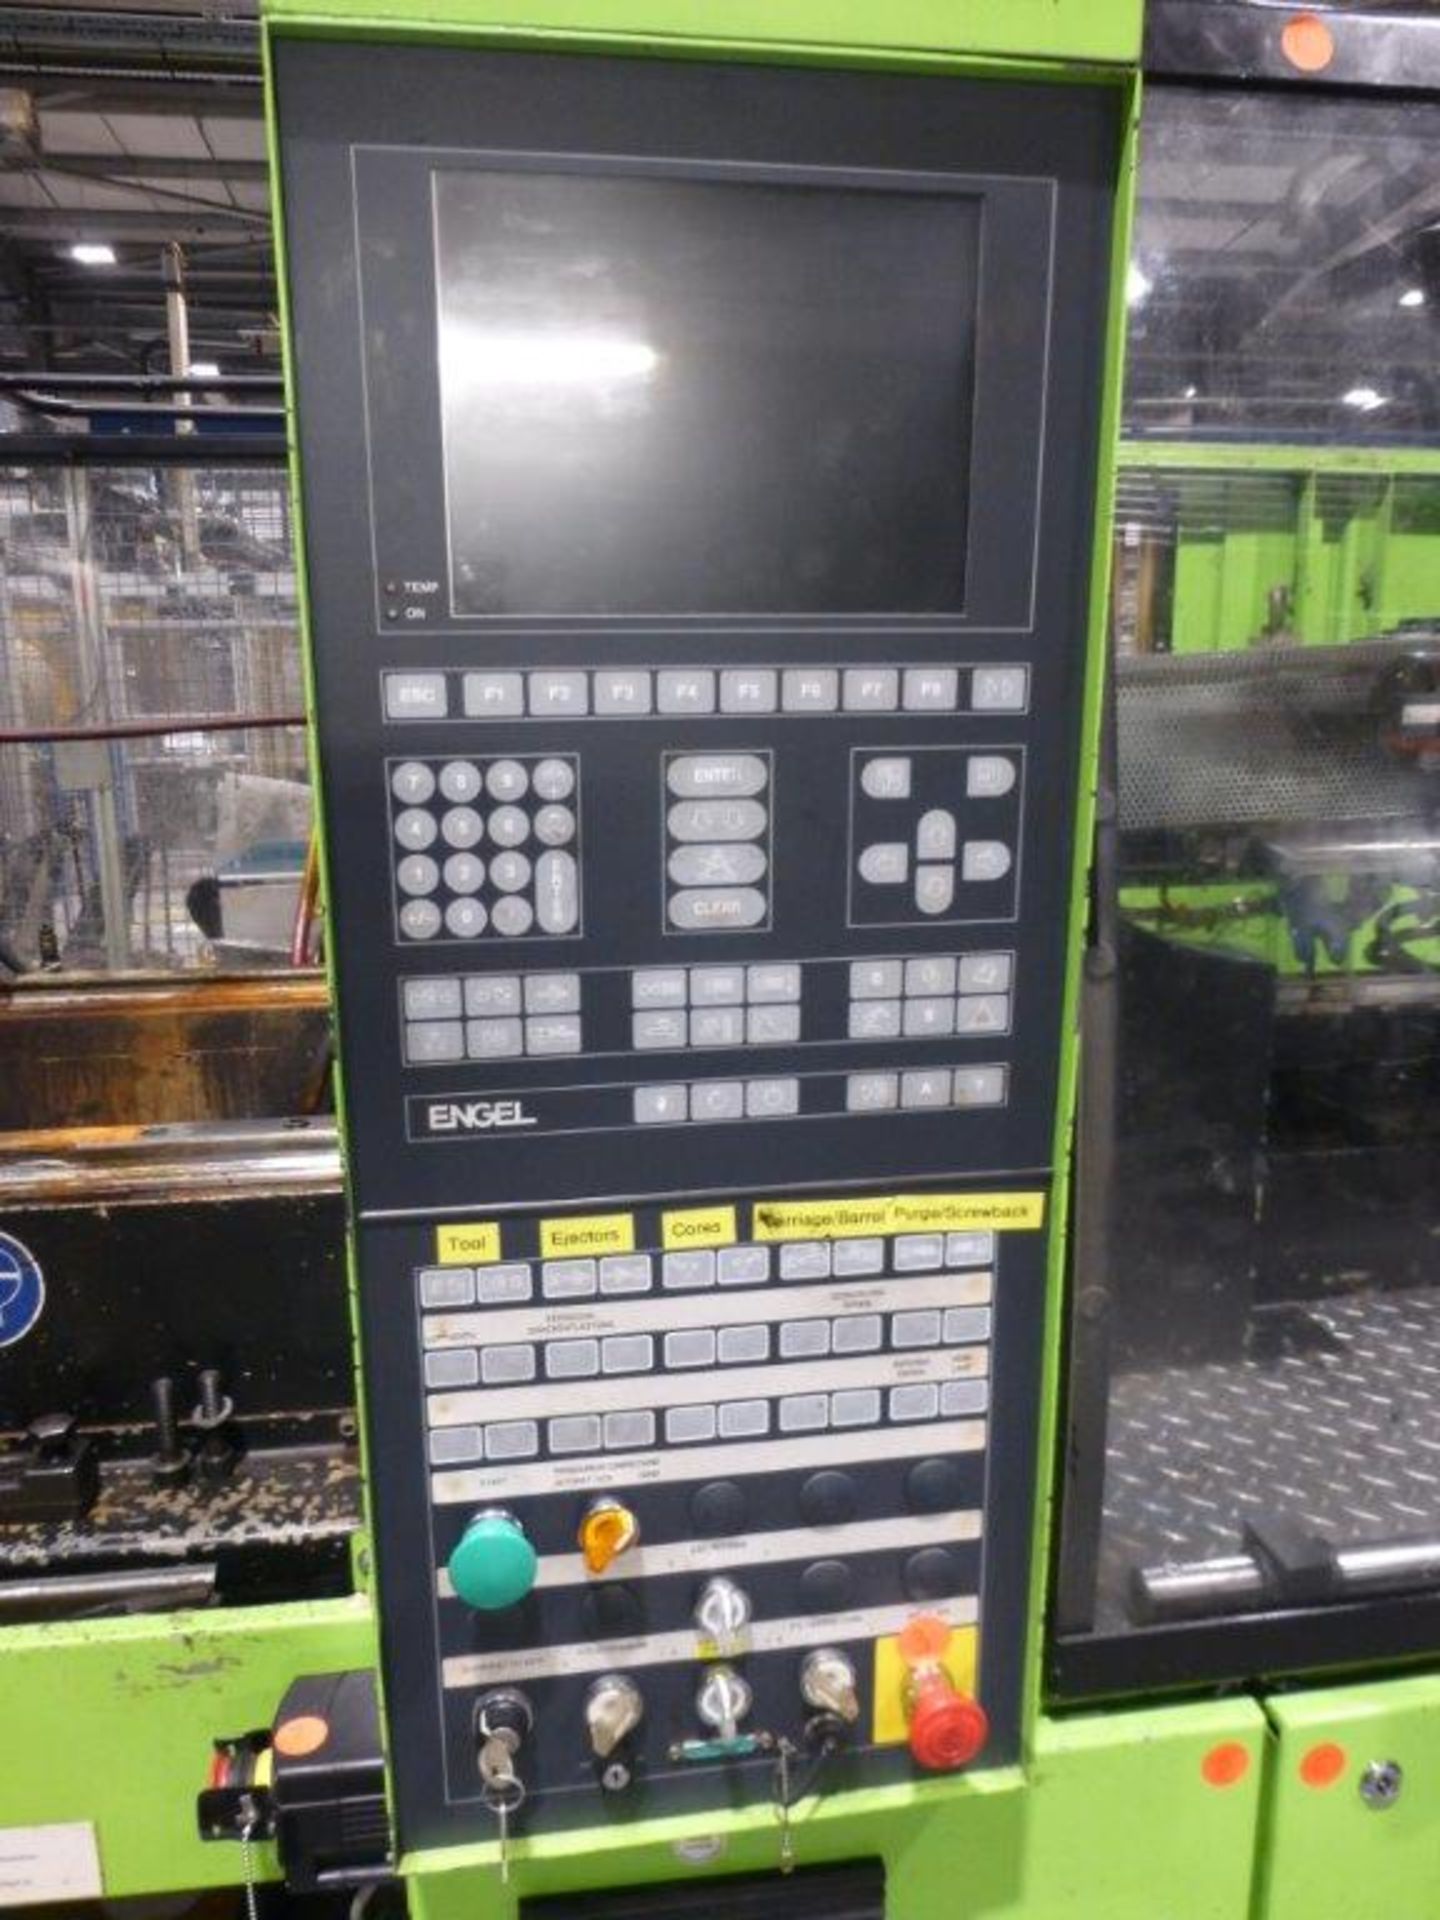 Engel Victory 500/150 Tech CNC Plastic Injection Moulding Machine Serial No. 46973 (2002) with - Image 3 of 8